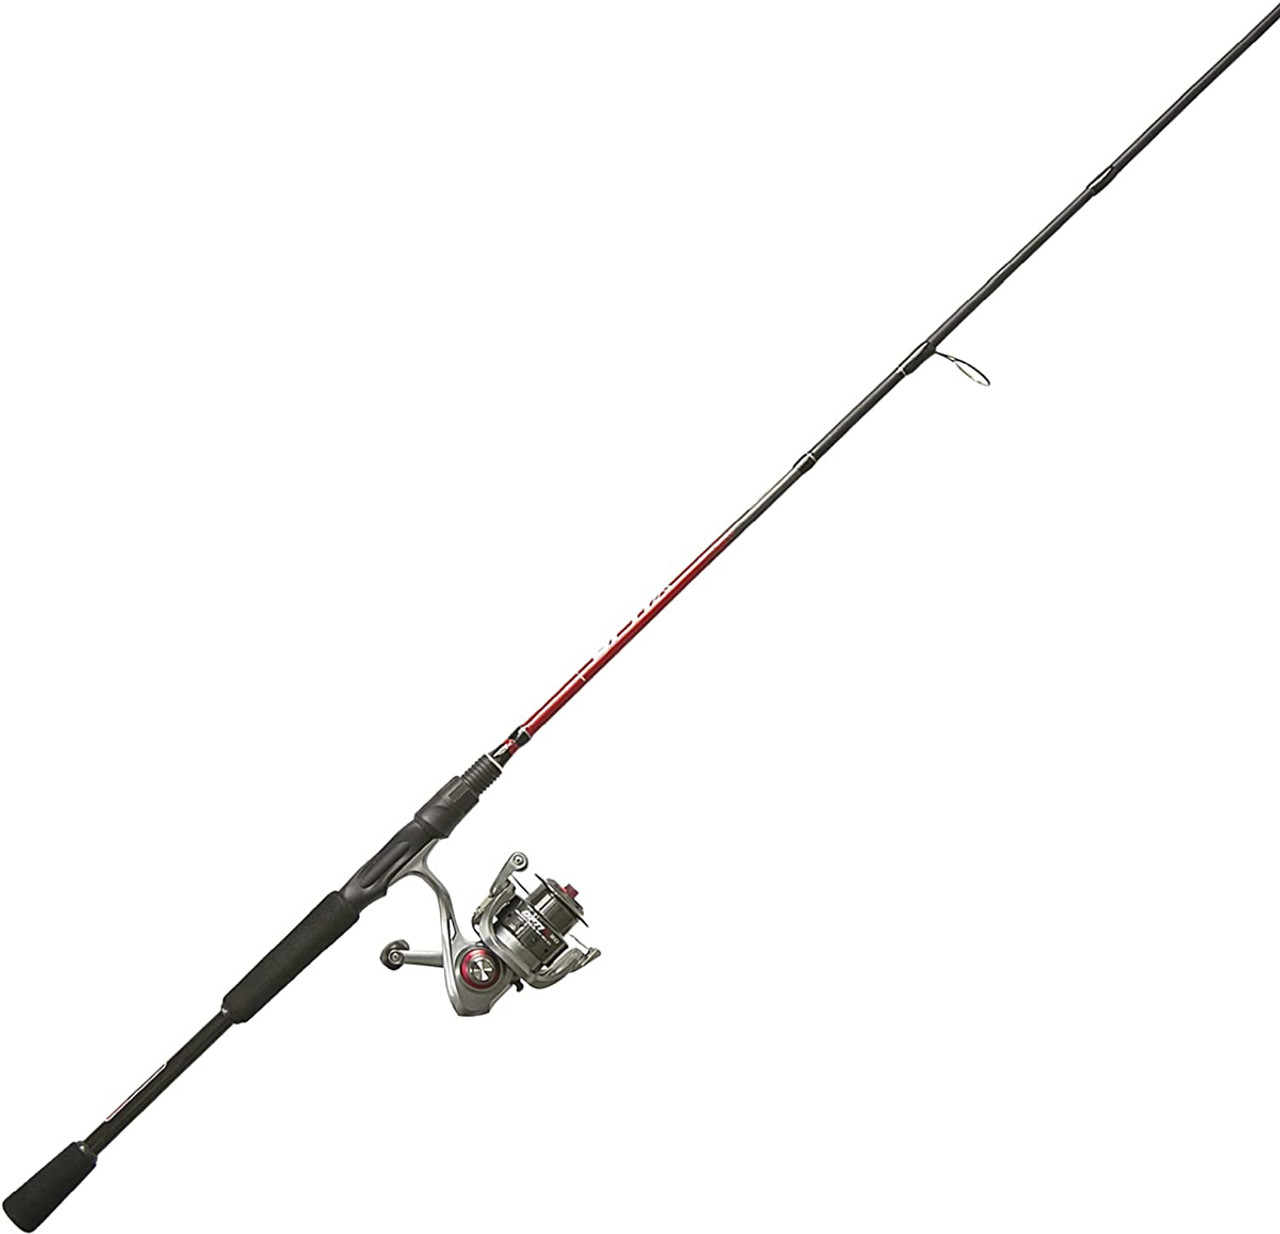  Spinning Reel and 2-Piece Fishing Rod Combo, Durable